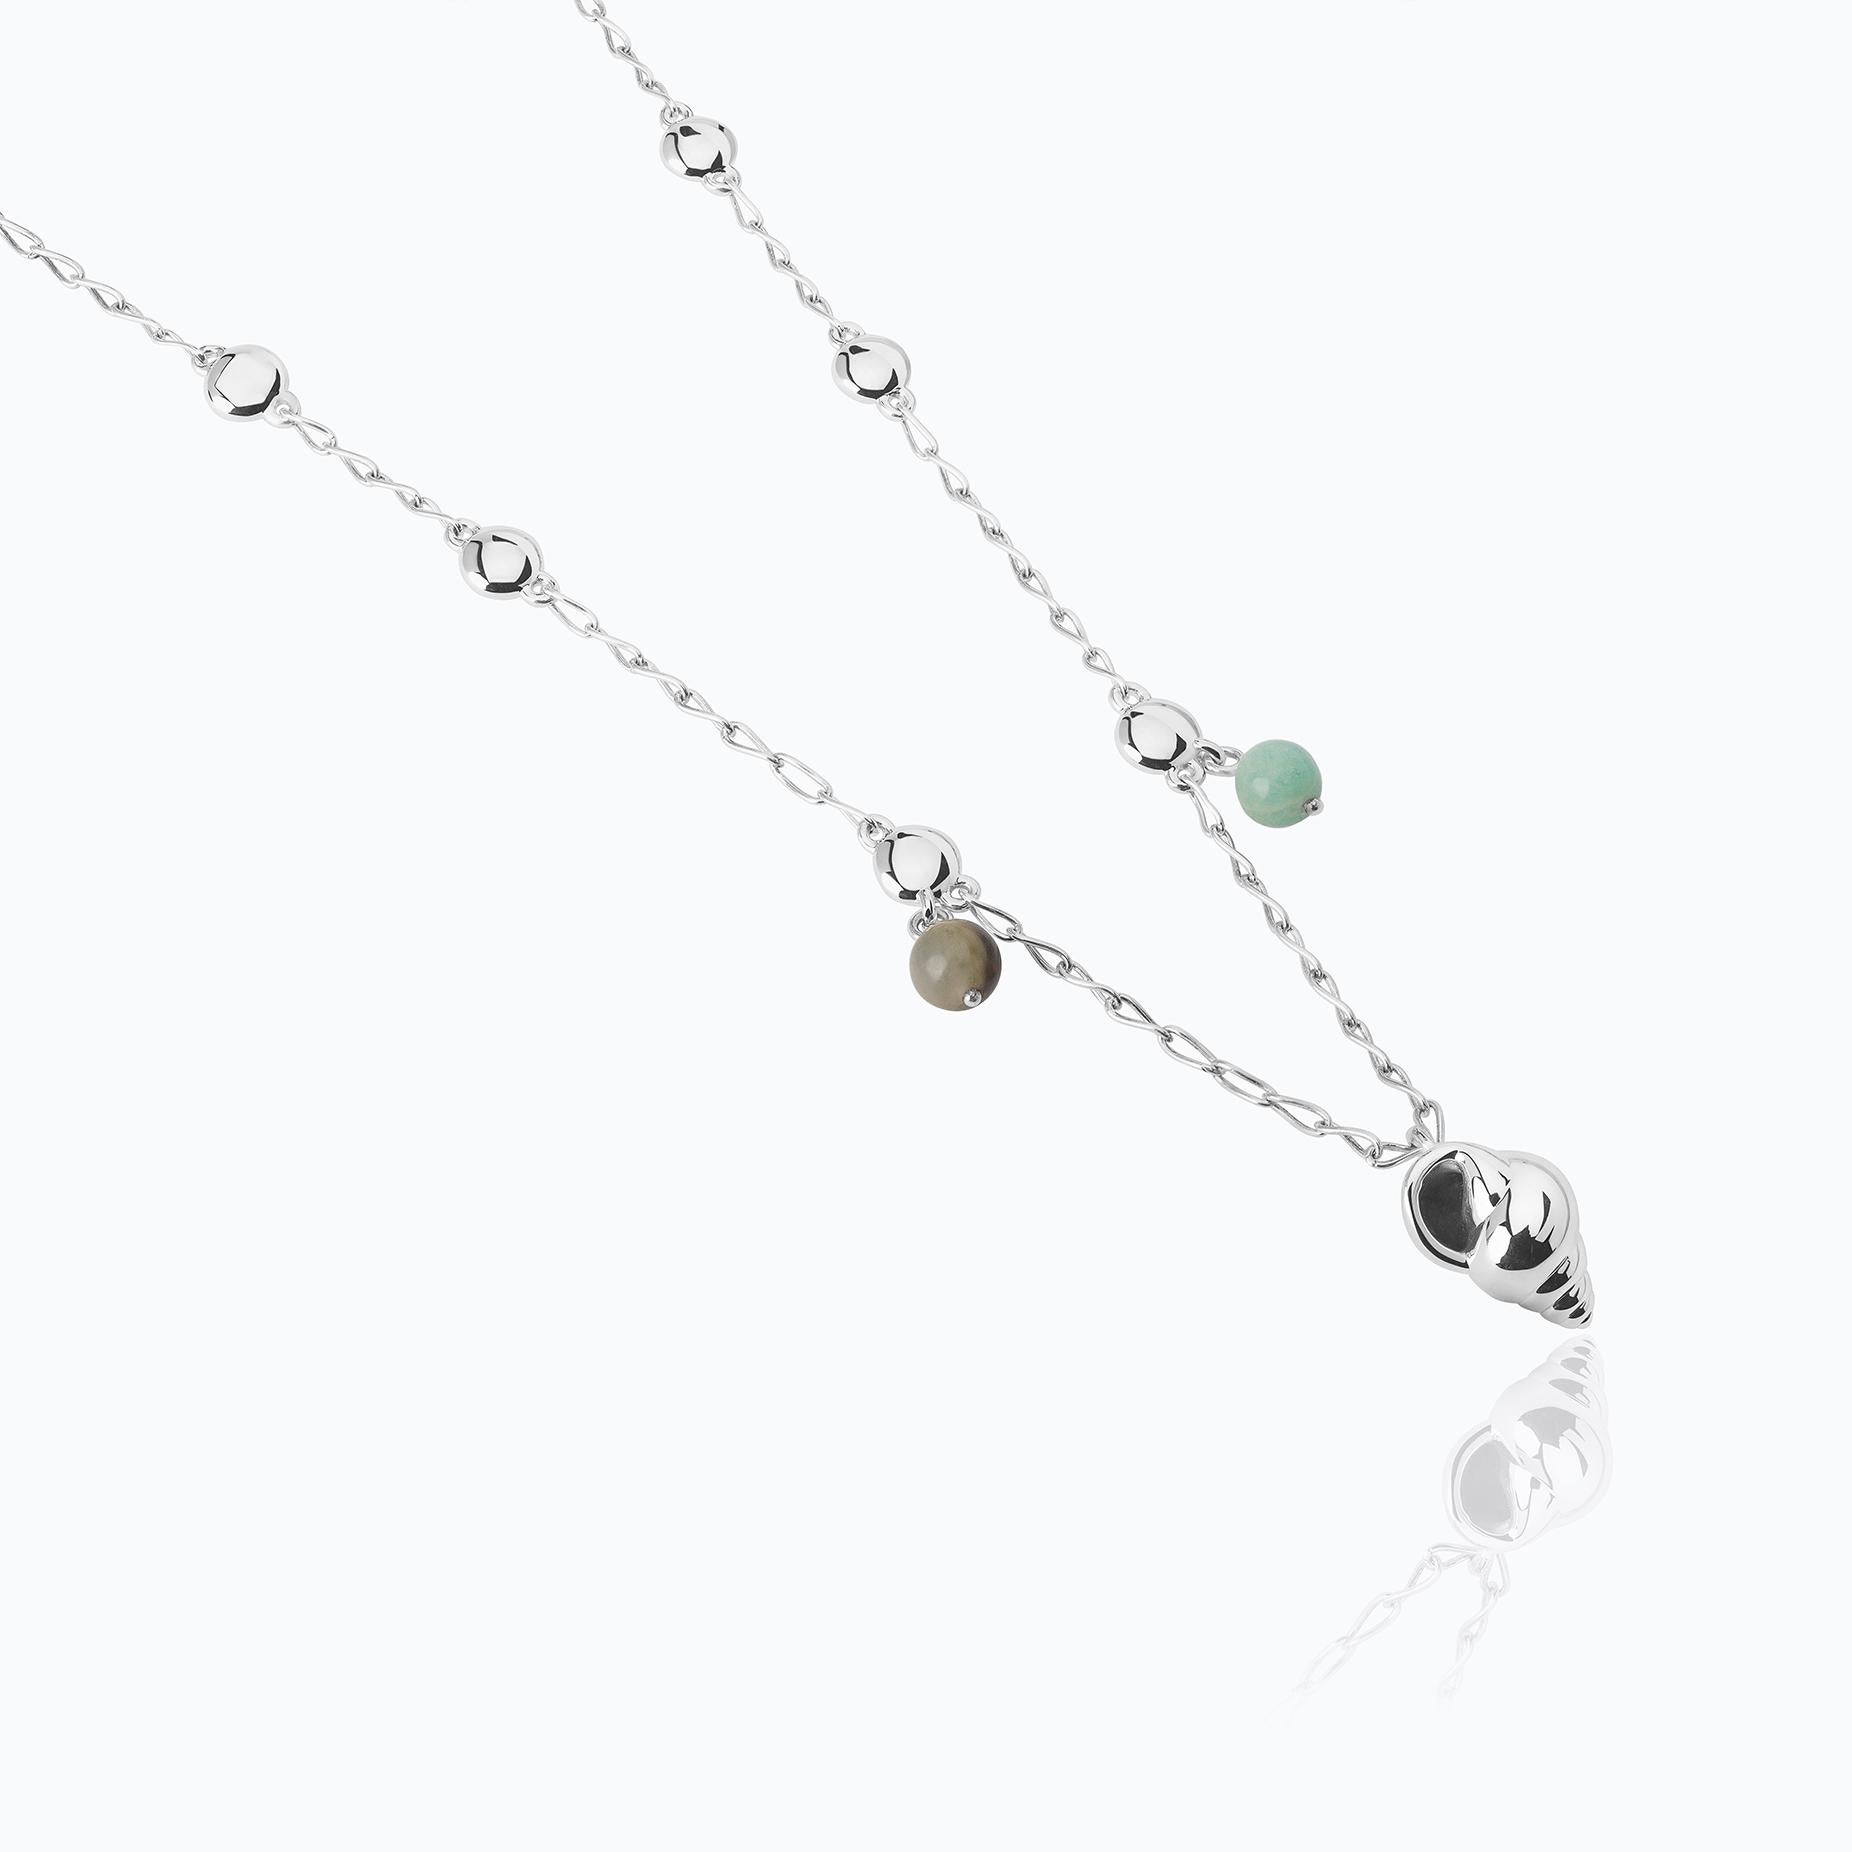 The Tulum Necklace is made of .925 silver with natural stones, Amazonite and Green Jasper. Inspired by the days of sun and sand on the beaches of Mexico, the necklace is made up of a chain decorated with natural stones, and a pendant with exquisite